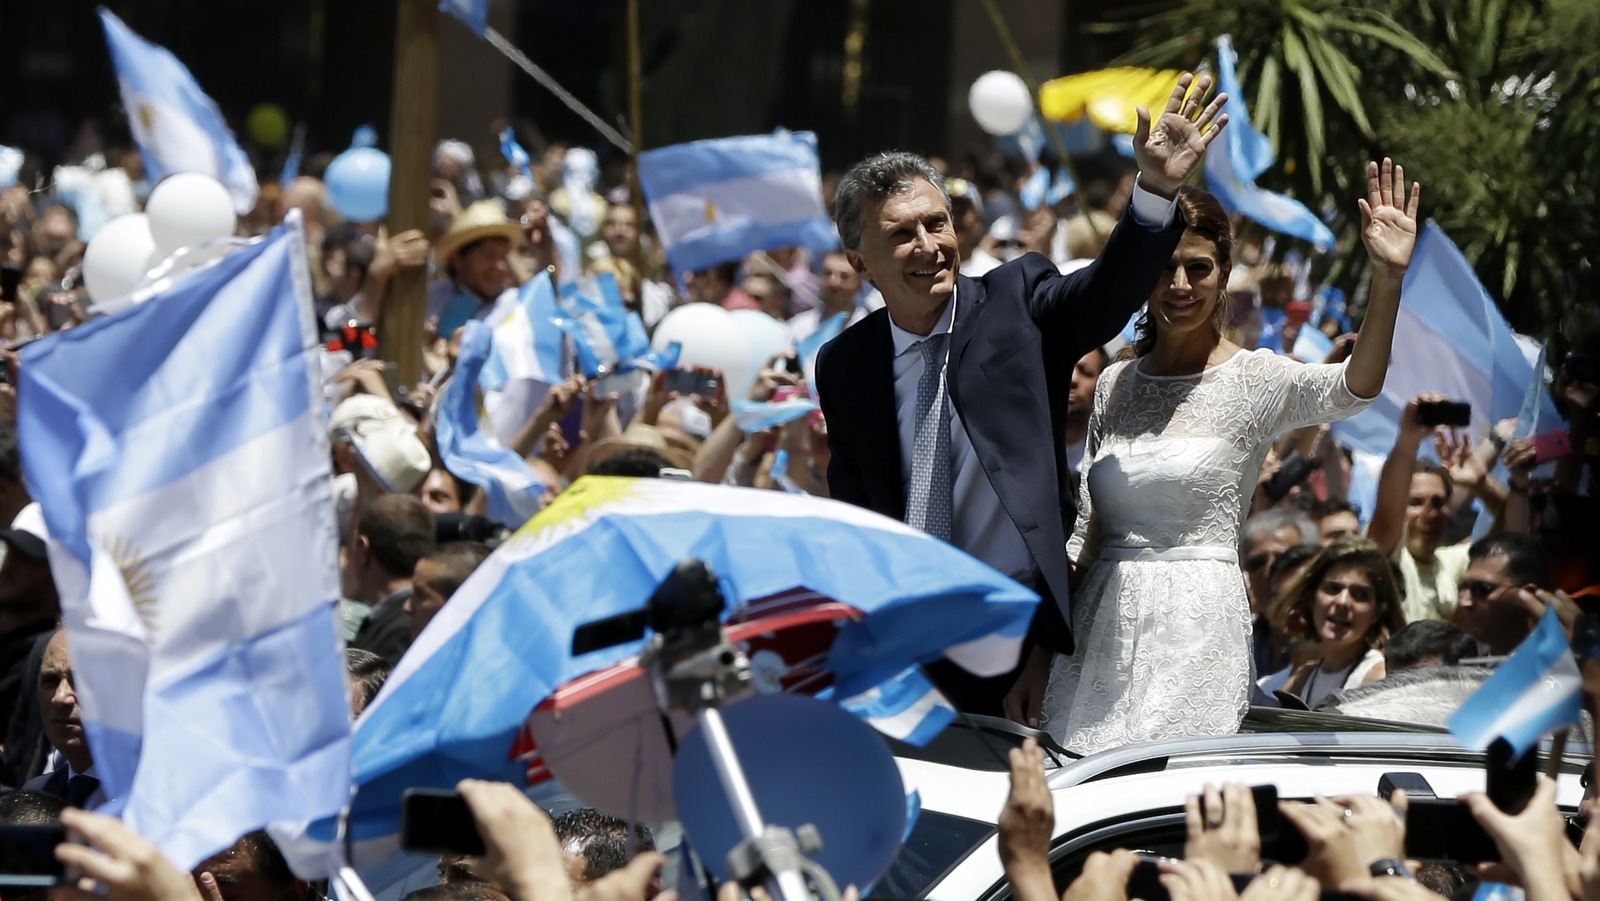 Mauricio Macri and first lady Juliana Awada wave to the crowd as they drive through the Plaza de Mayo square on their way to the presidential palace after he was sworn in as Argentina's new president in Buenos Aires, Argentina, Thursday, Dec. 10, 2015. Macri assumed power Thursday replacing President Cristina Fernandez.(AP Photo/Ricardo Mazalan)